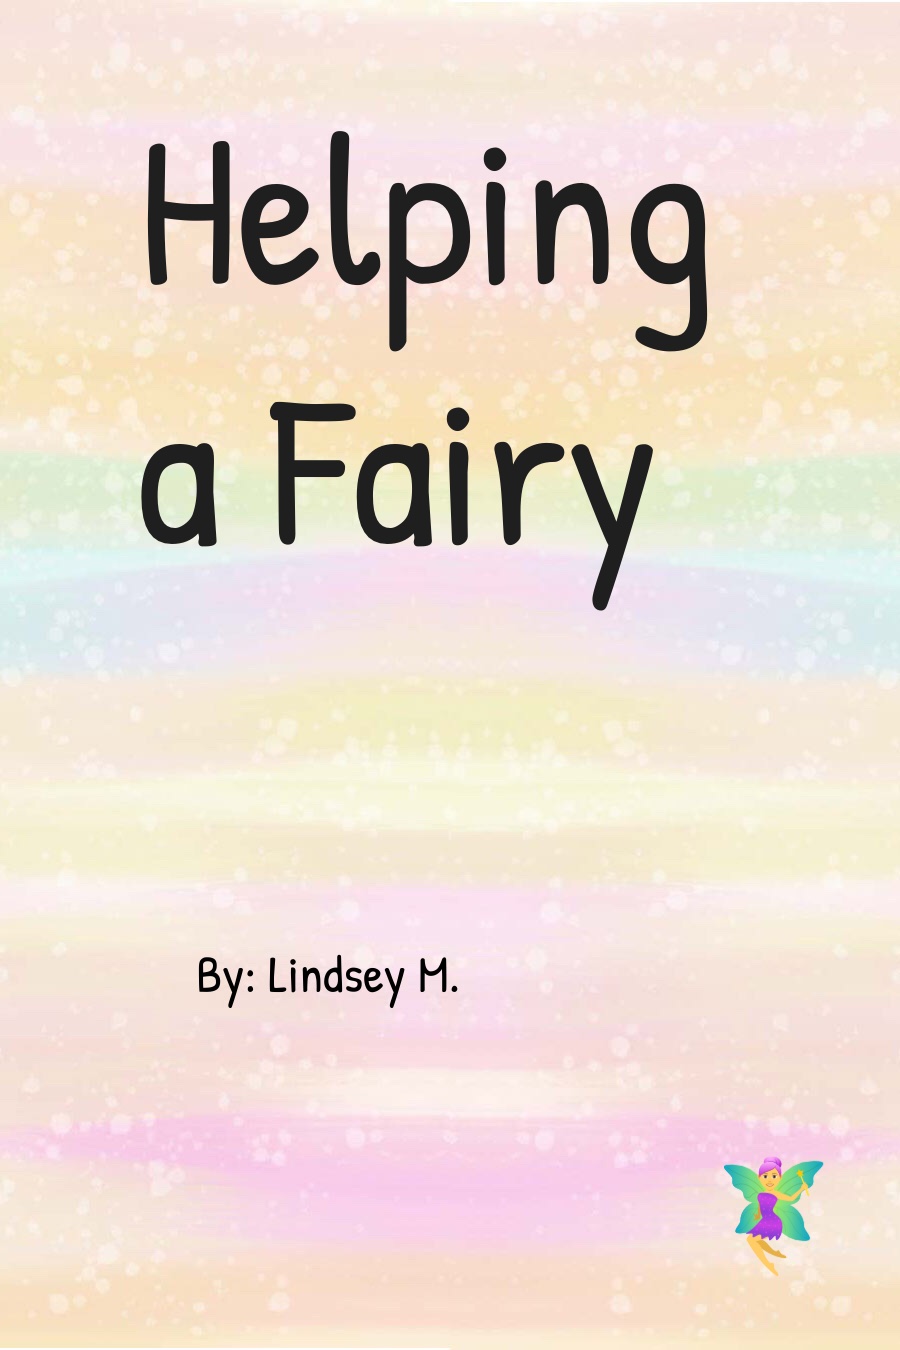 Helping a fairy by Lindsey M